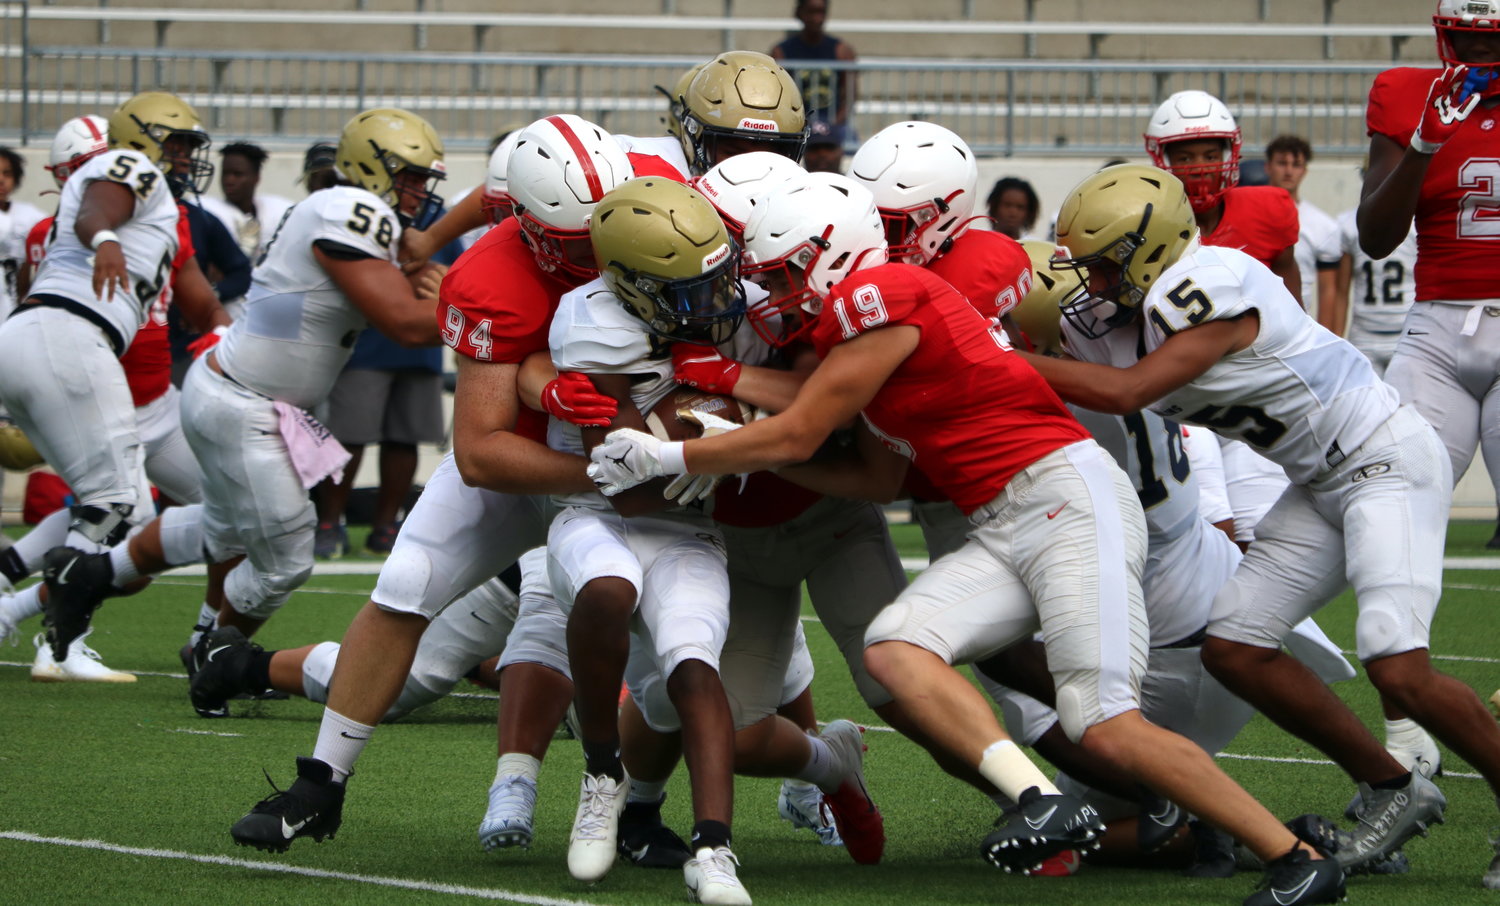 Katy’s defense makes a stop during Katy’s scrimmage against Klein Collins on Friday at Legacy Stadium.